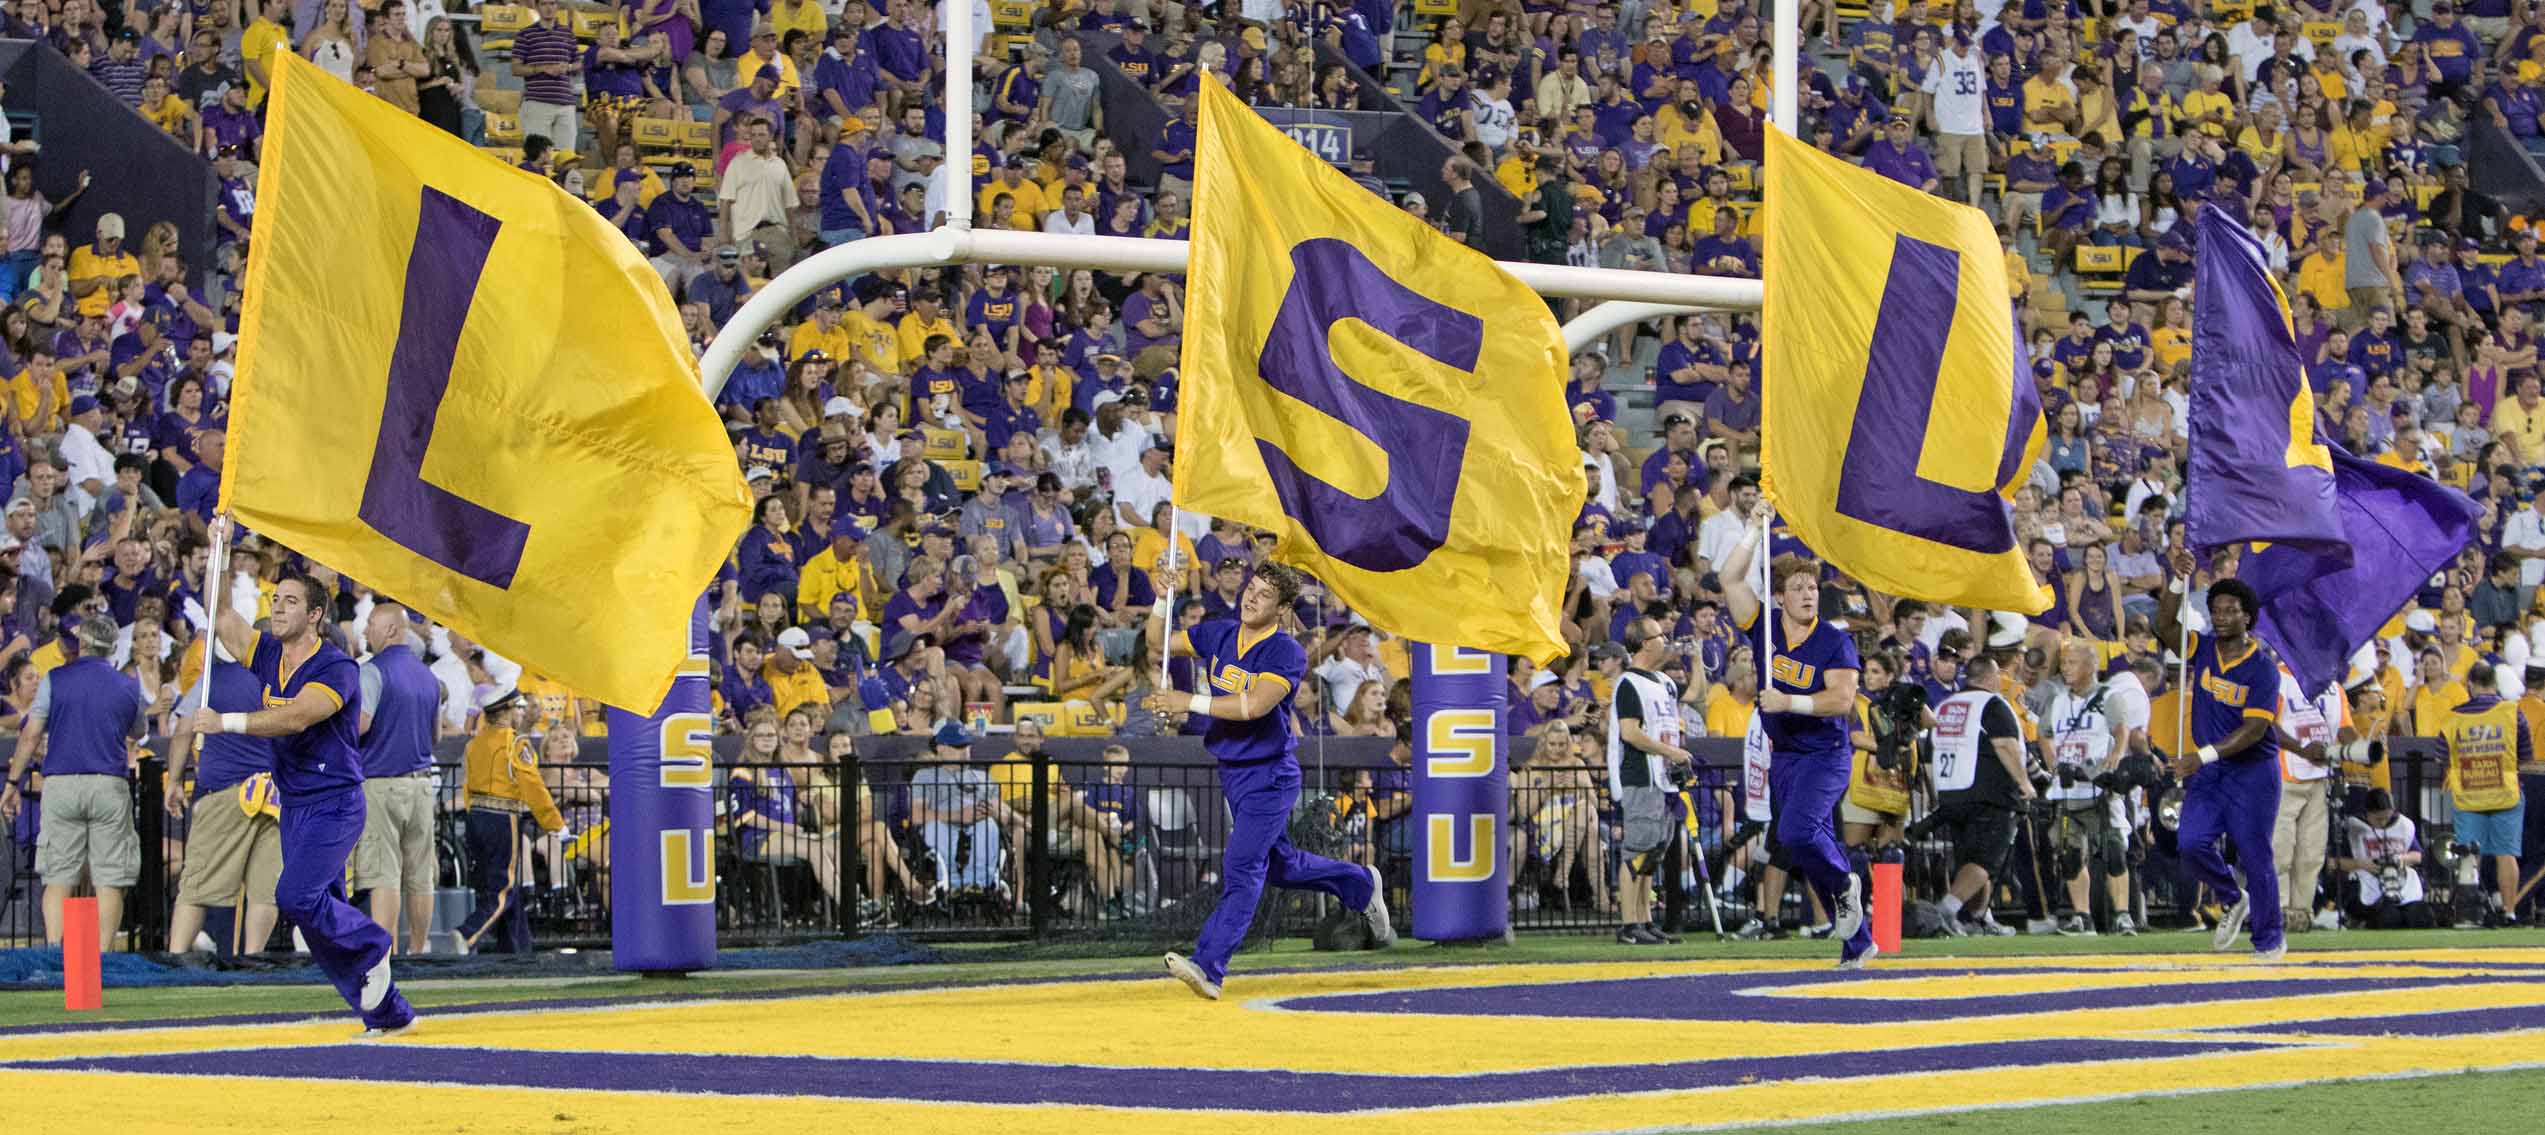 SEC ANNOUNCES 2020 LEAGUE SCHEDULE; LSU to host Ole Miss, Mississippi State, Alabama and South Carolina in Tiger Stadium Next Year